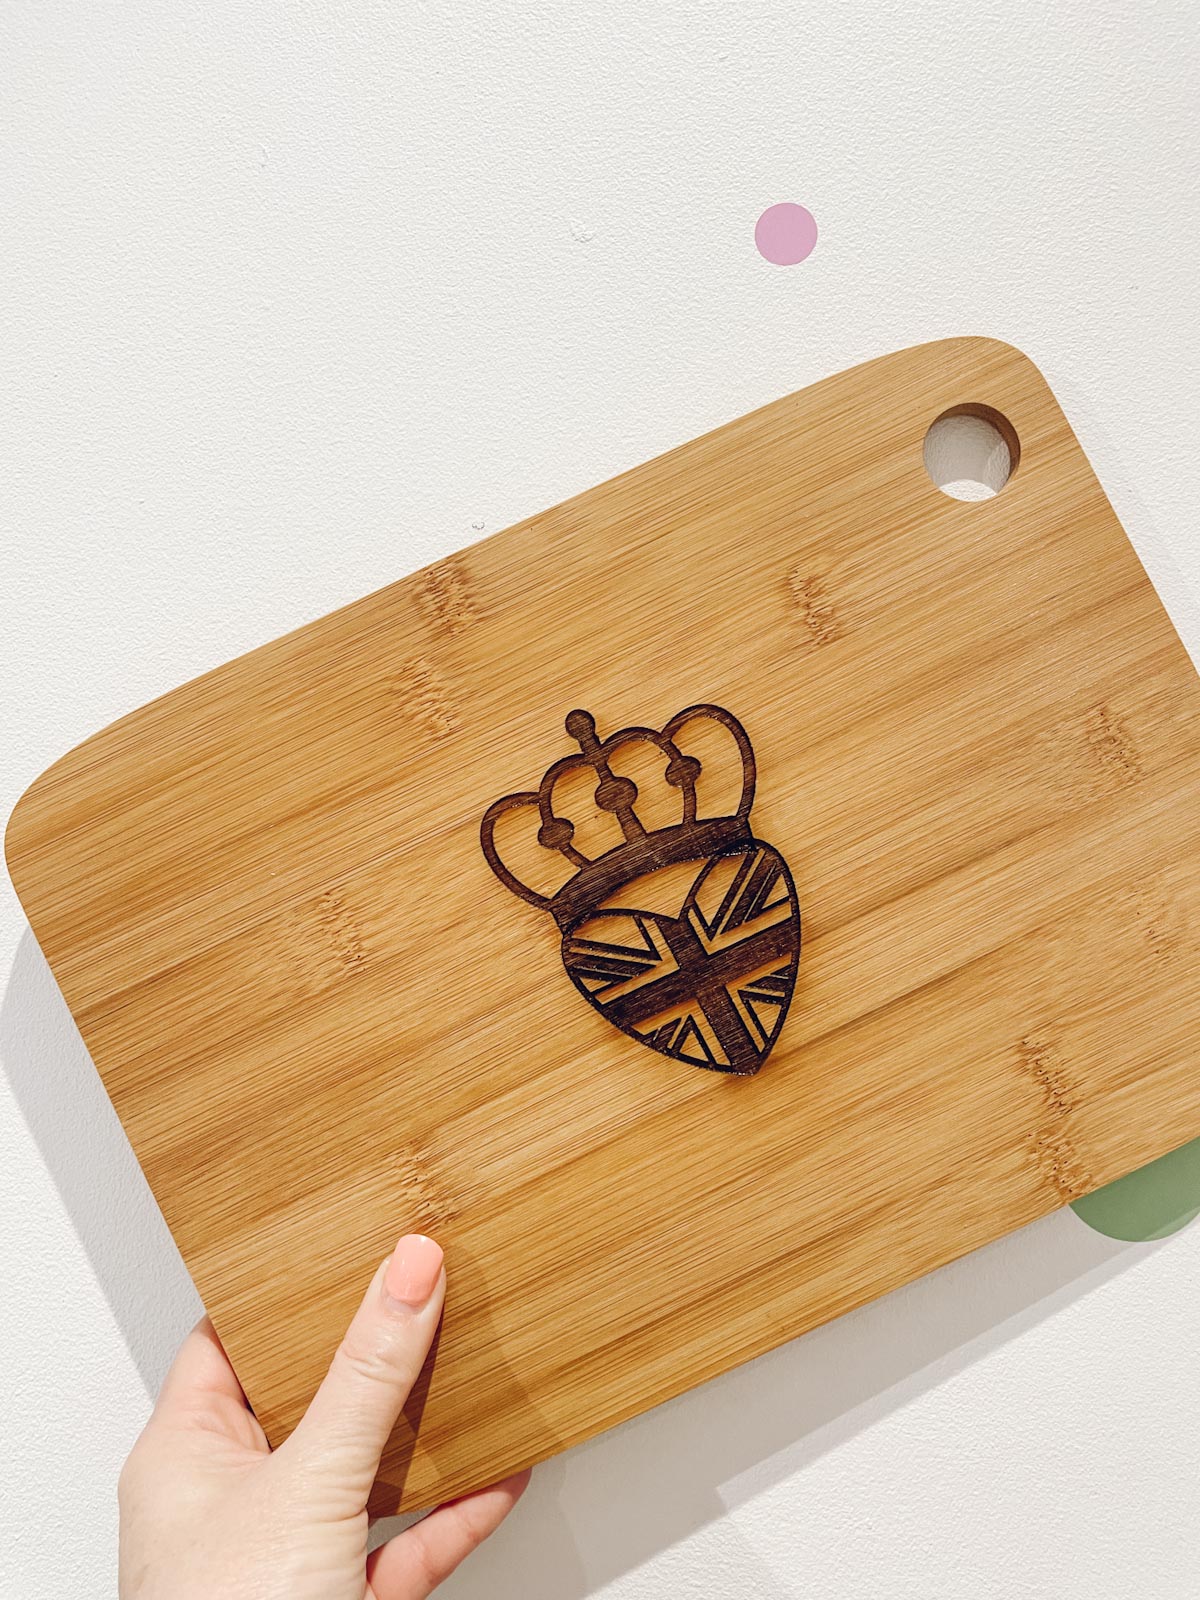 Engrave Union Jack Jubilee Chopping Board Made With Glowforge